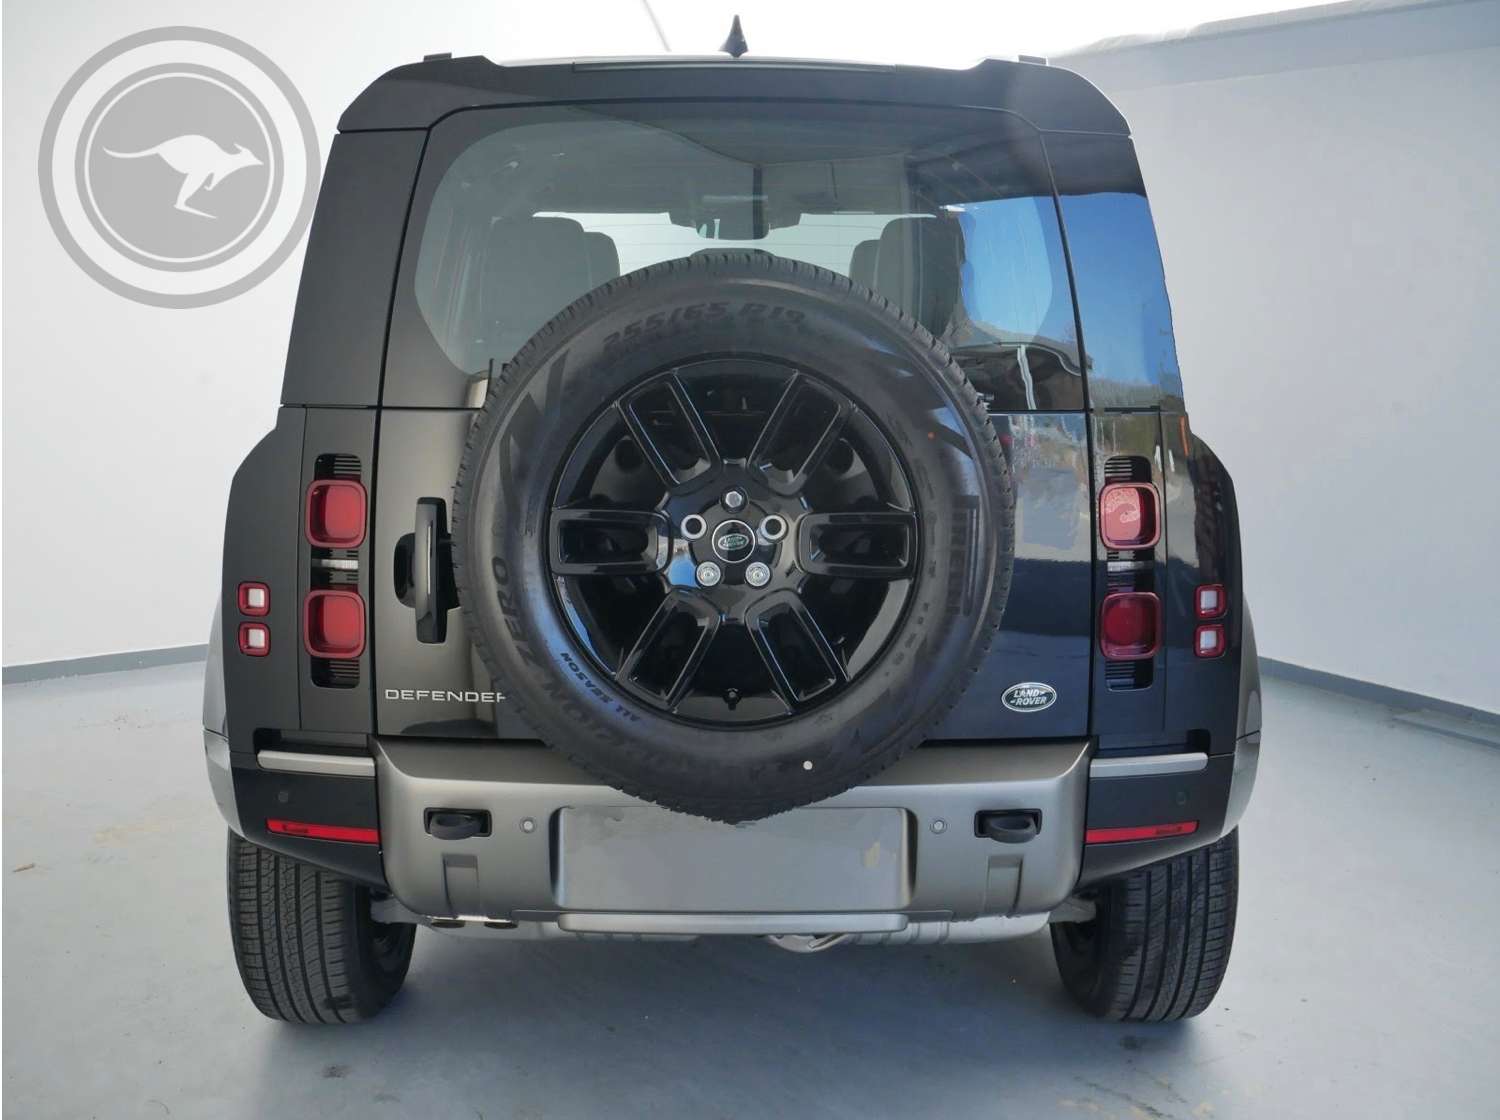 Rent a Land Rover Defender 110 7 Seater in Milan, Florence, Zurich, Como